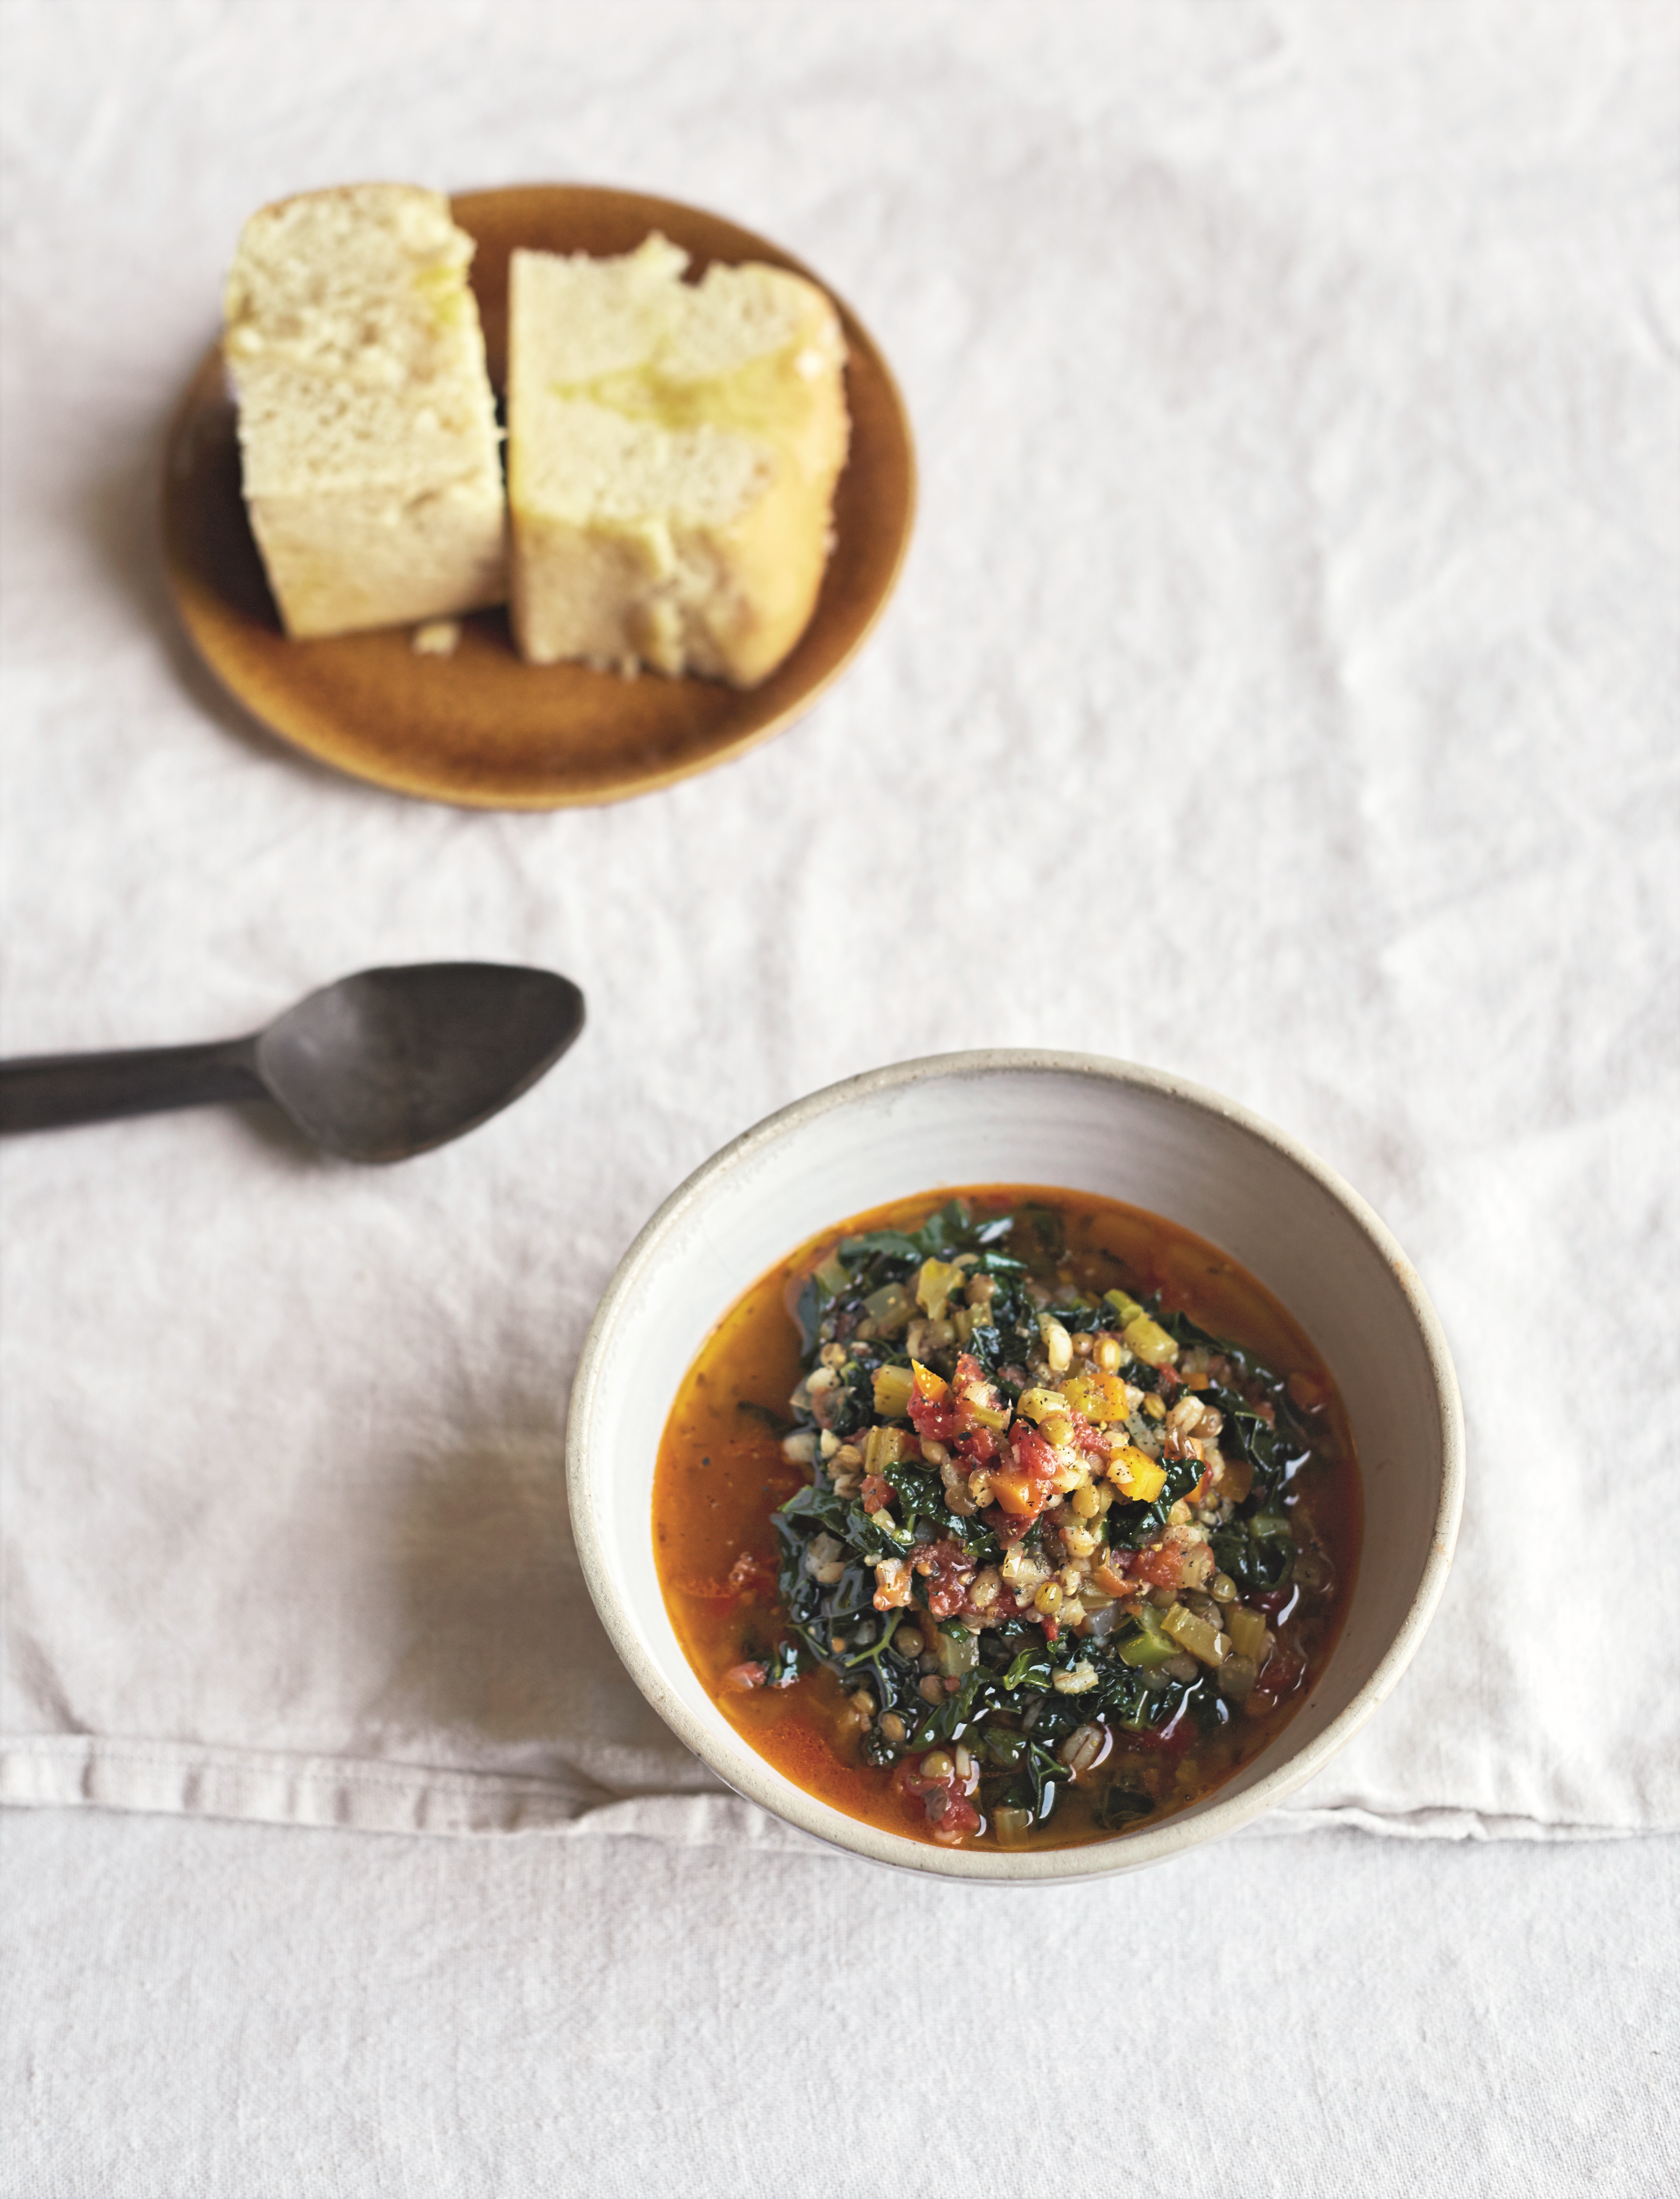 7 Cozy Fall Soups to Add to Your Meal Plan